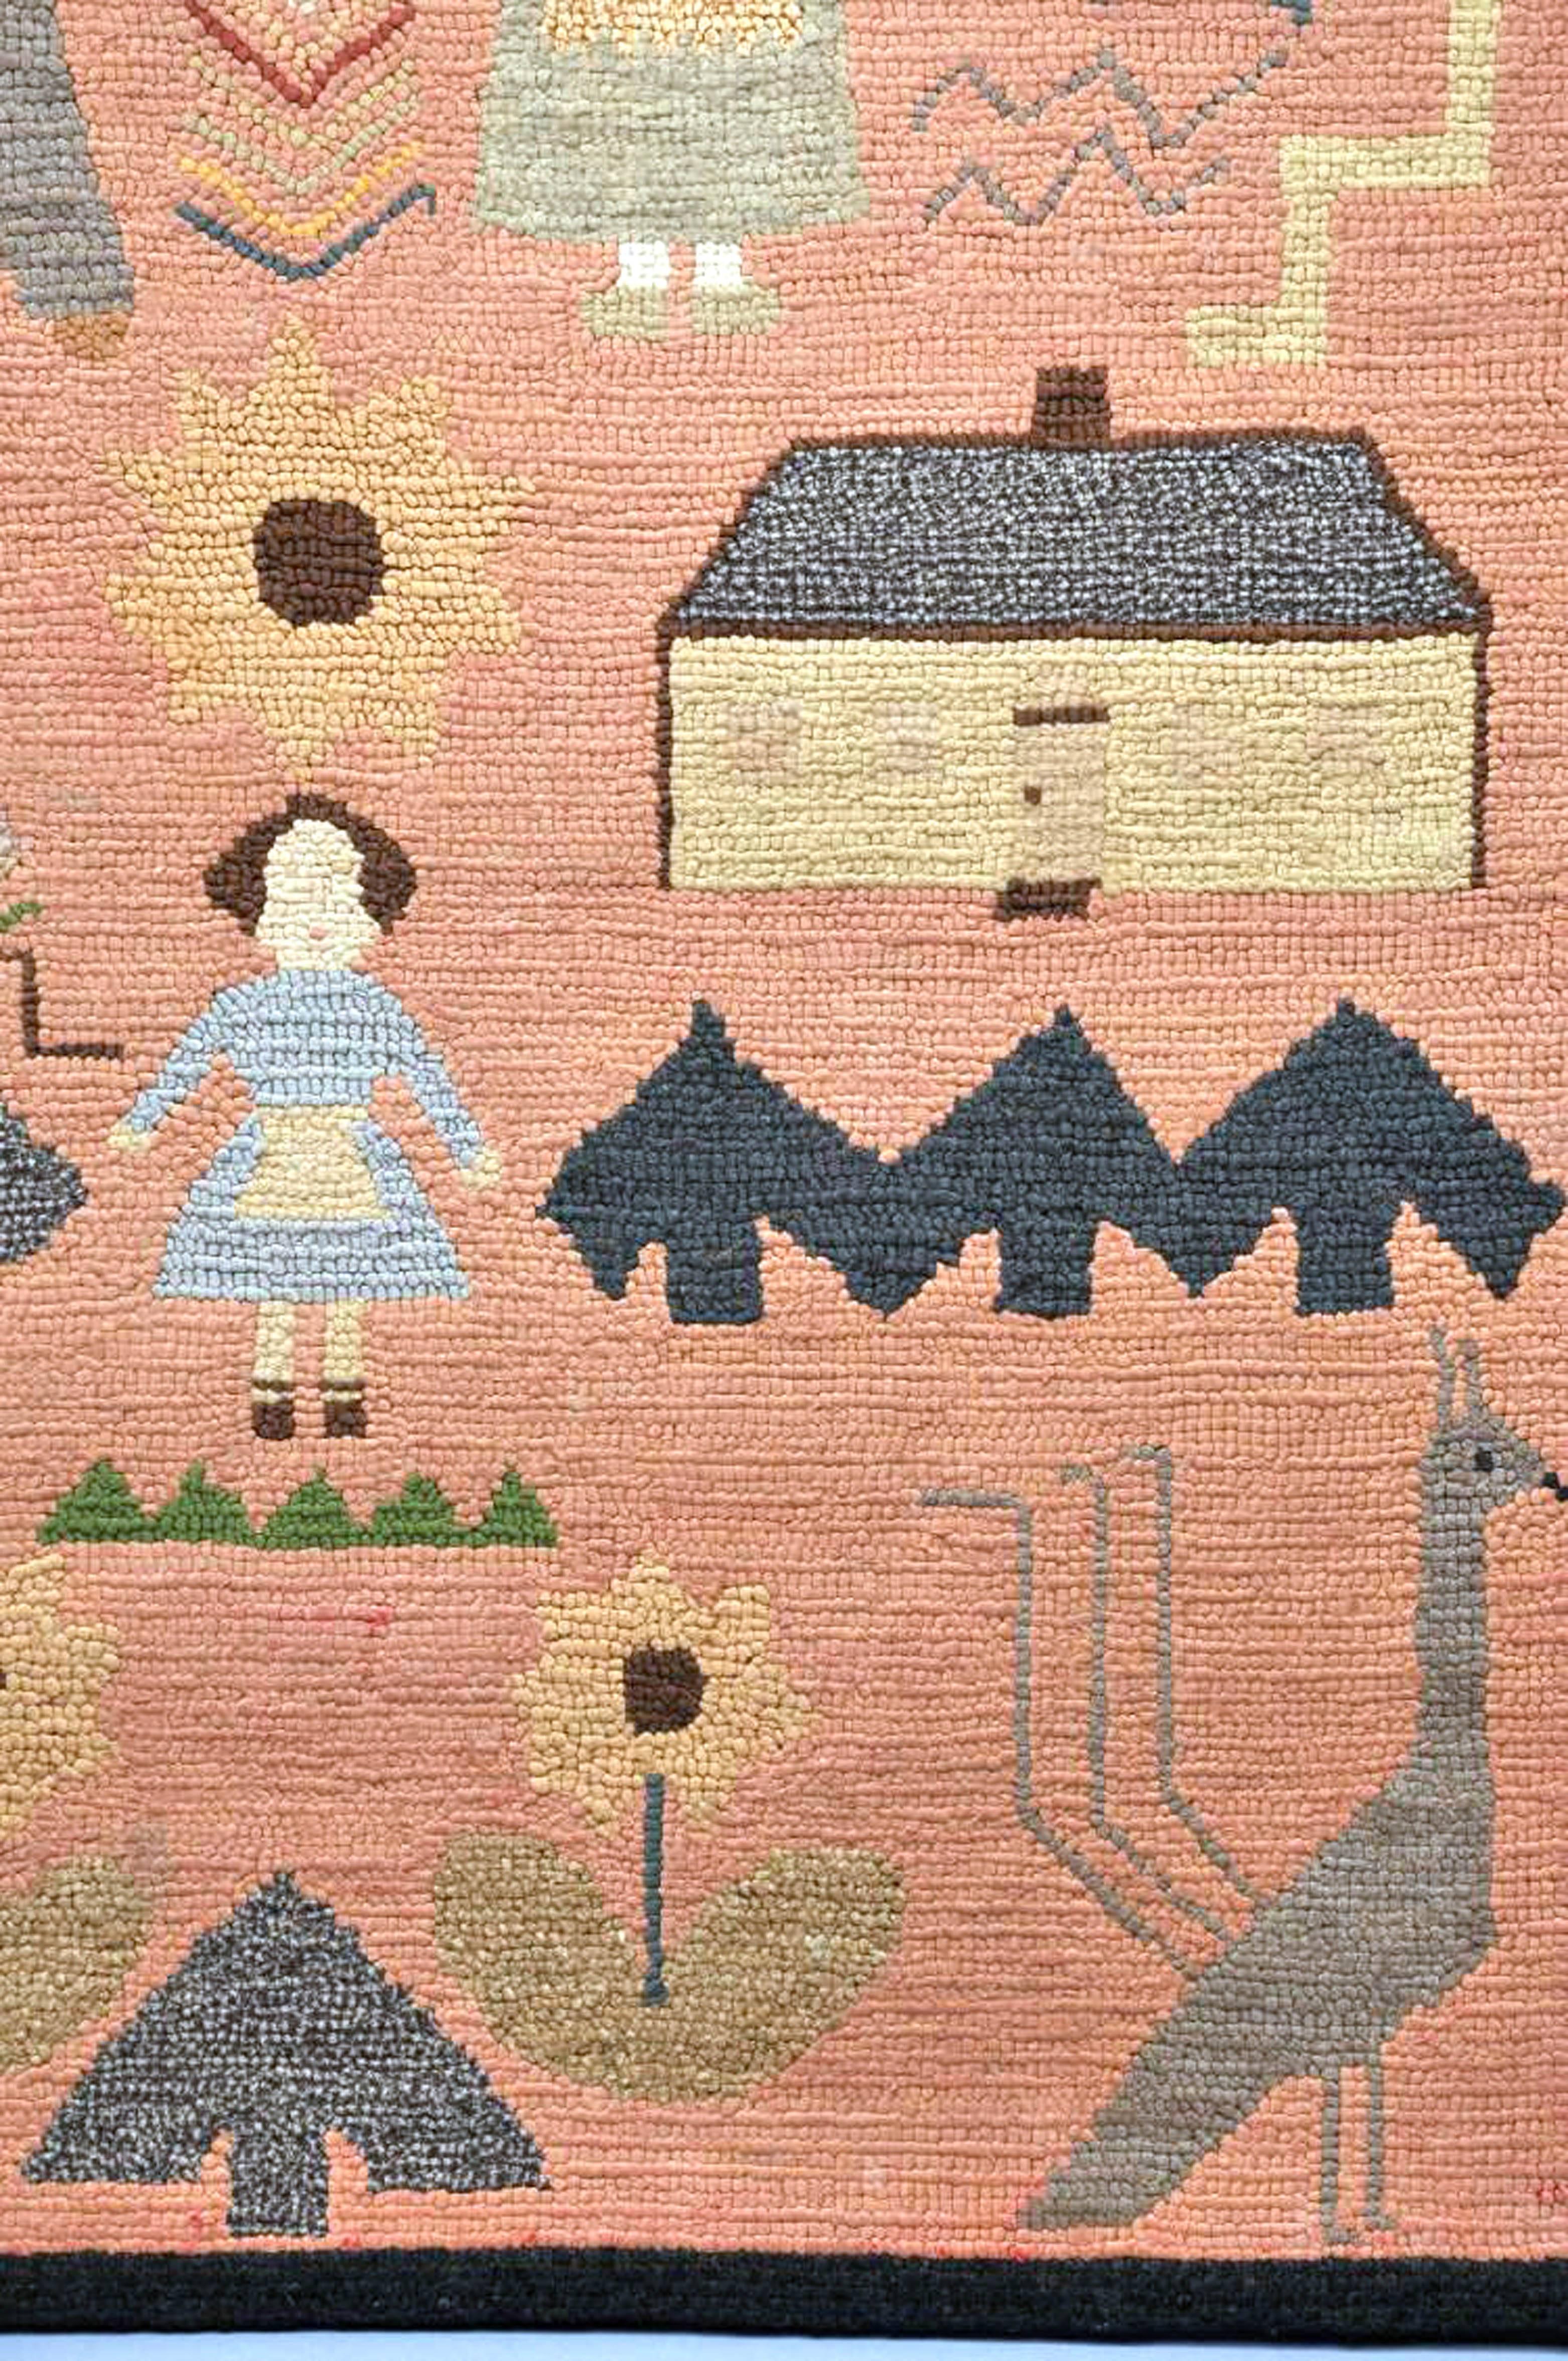 American Folk Art Pictorial Hooked Rug, Mounted on Stretcher, Late 19th Century 1